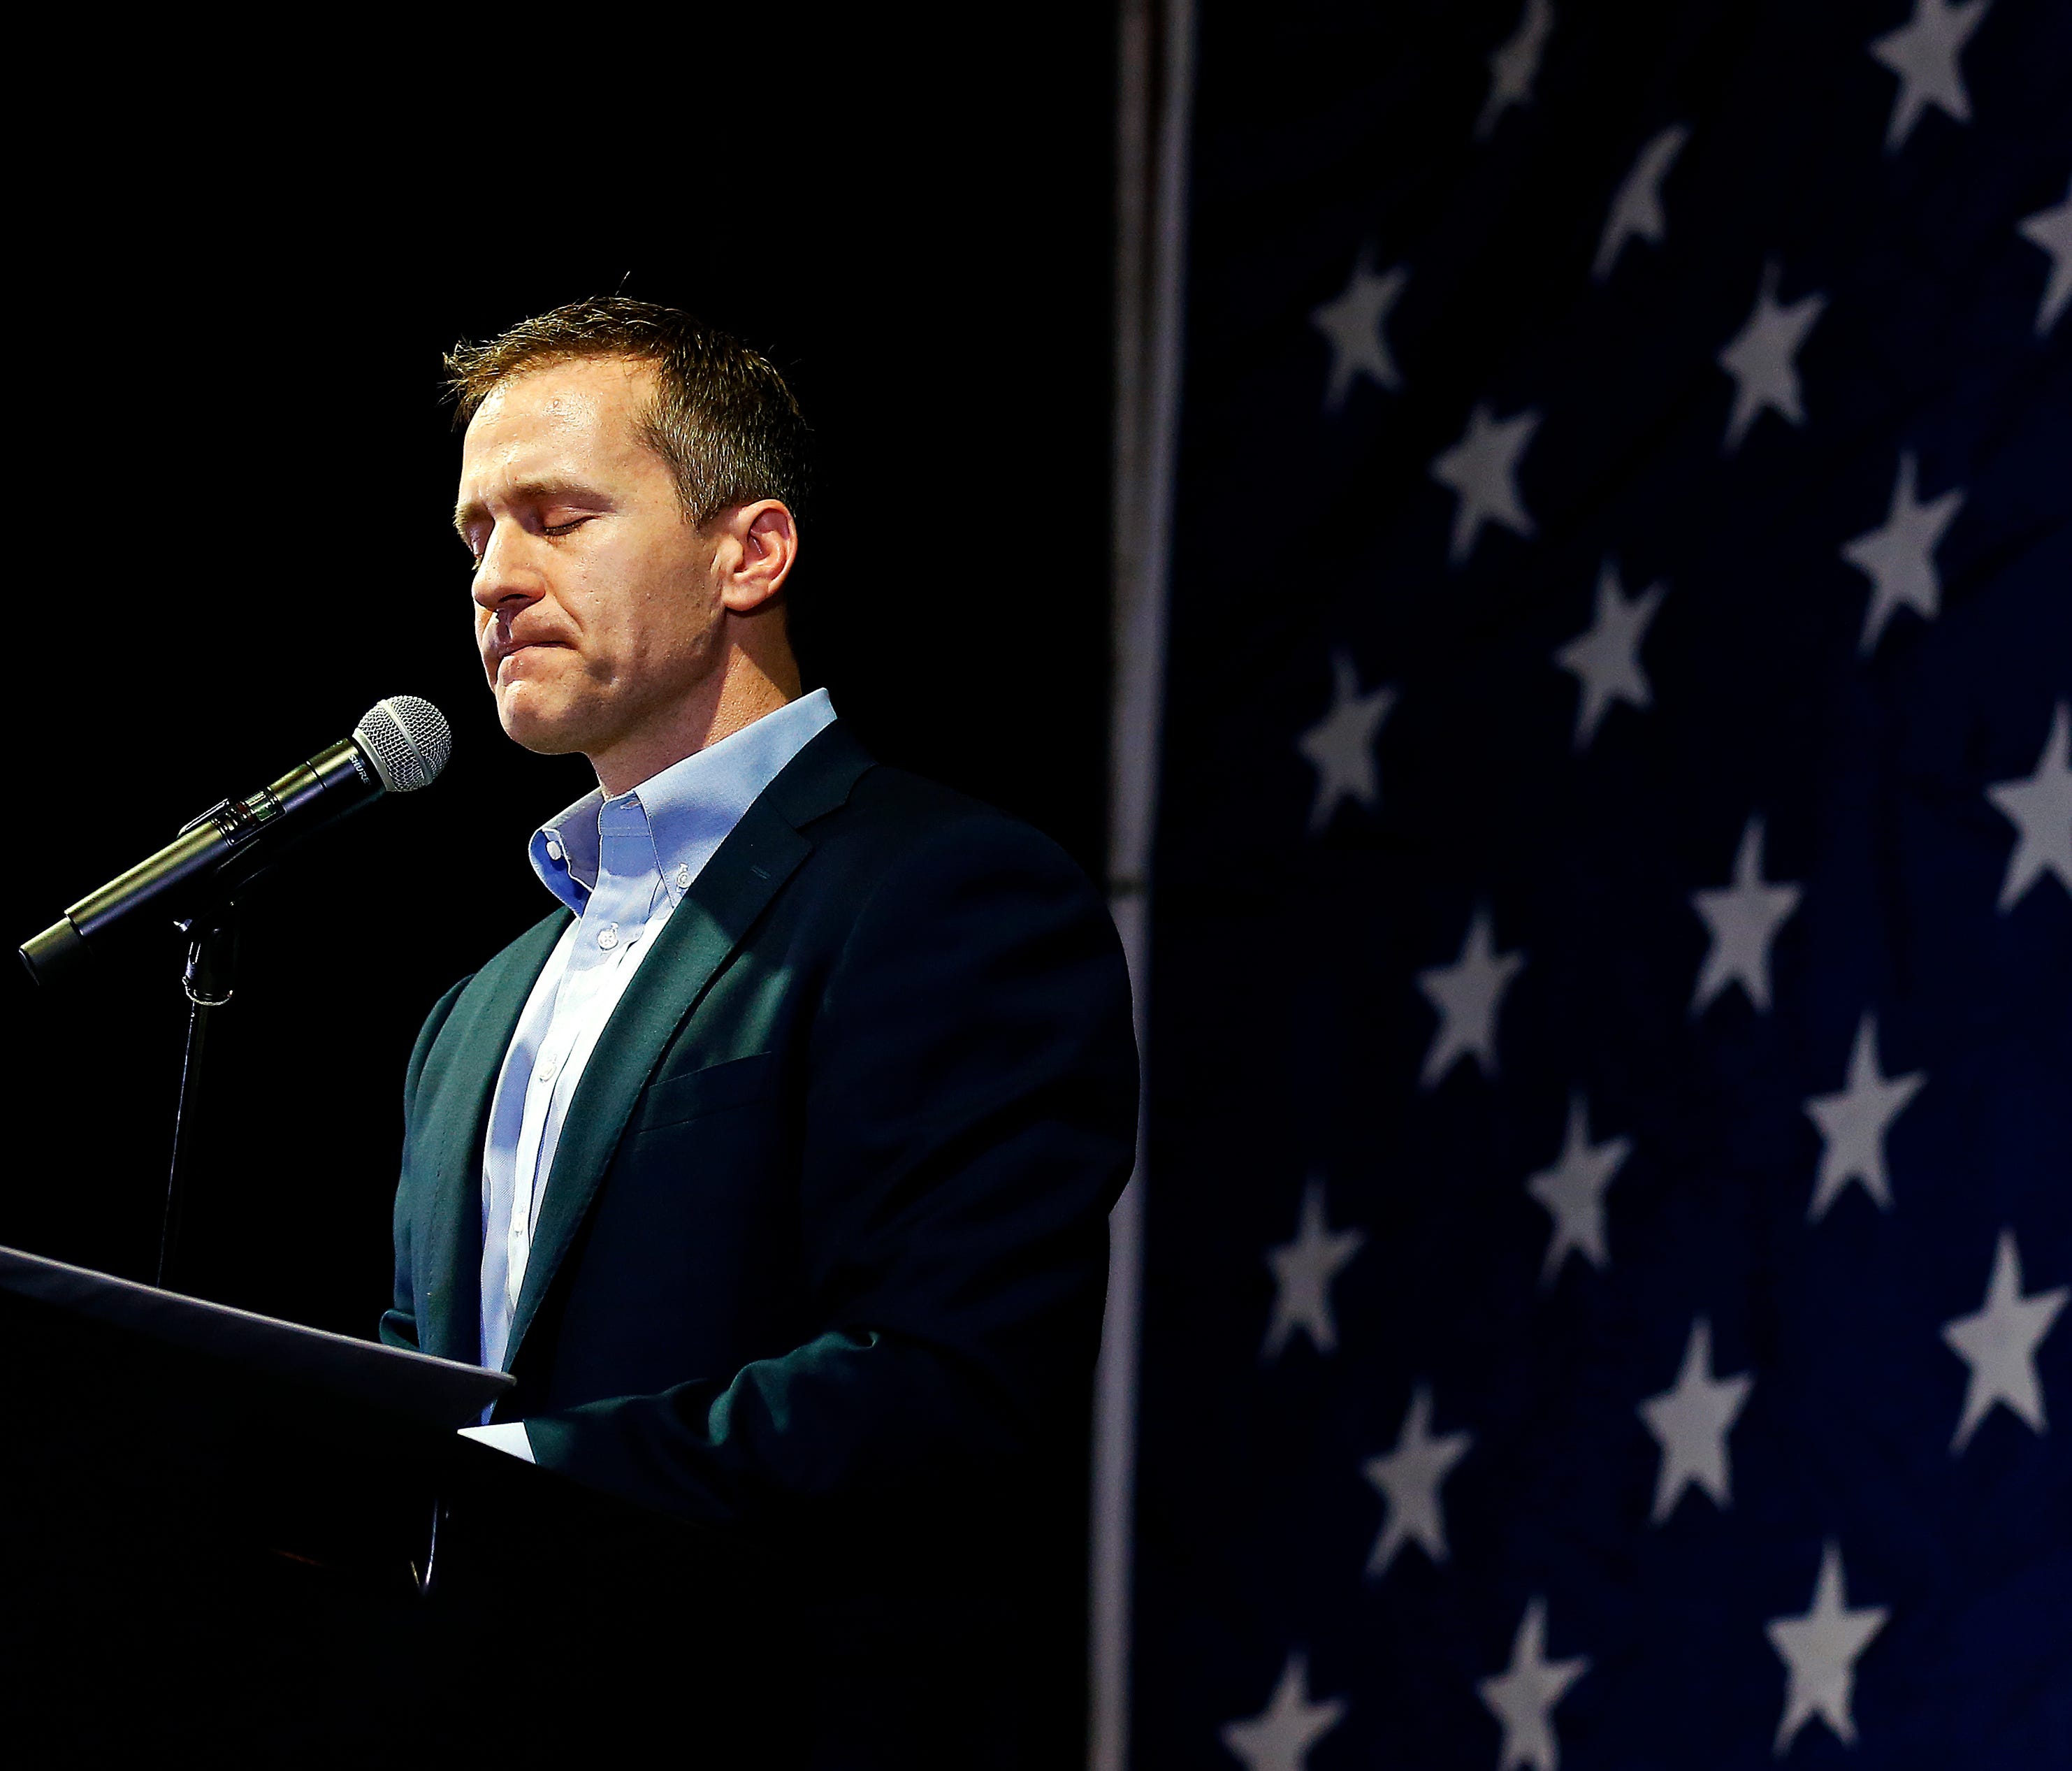 Missouri Gov. Eric Greitens addresses attendees to his meet and greet event as part of Lincoln Days at the University Plaza Hotel in Springfield, Mo. on Feb. 25, 2017.